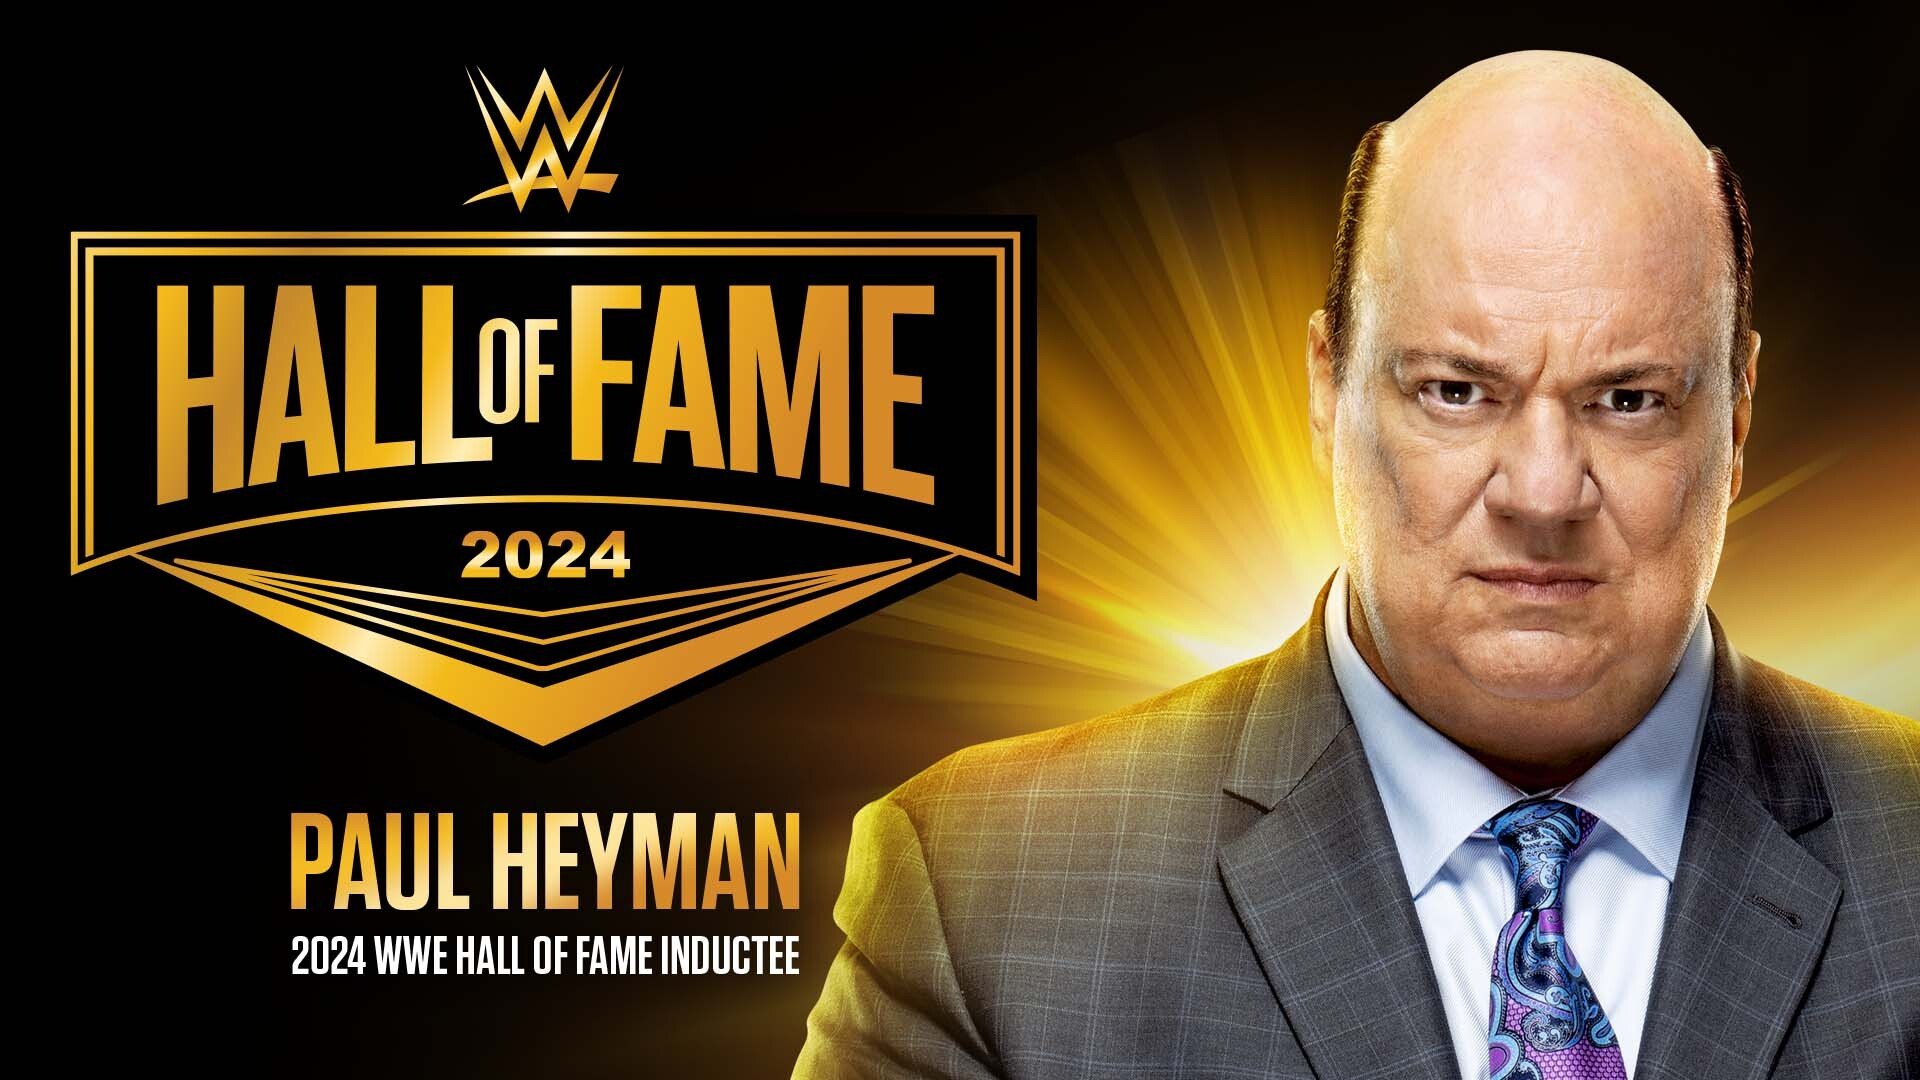 Tommy Dreamer’s Perspective on the Potential Induction of Paul Heyman into the WWE Hall of Fame